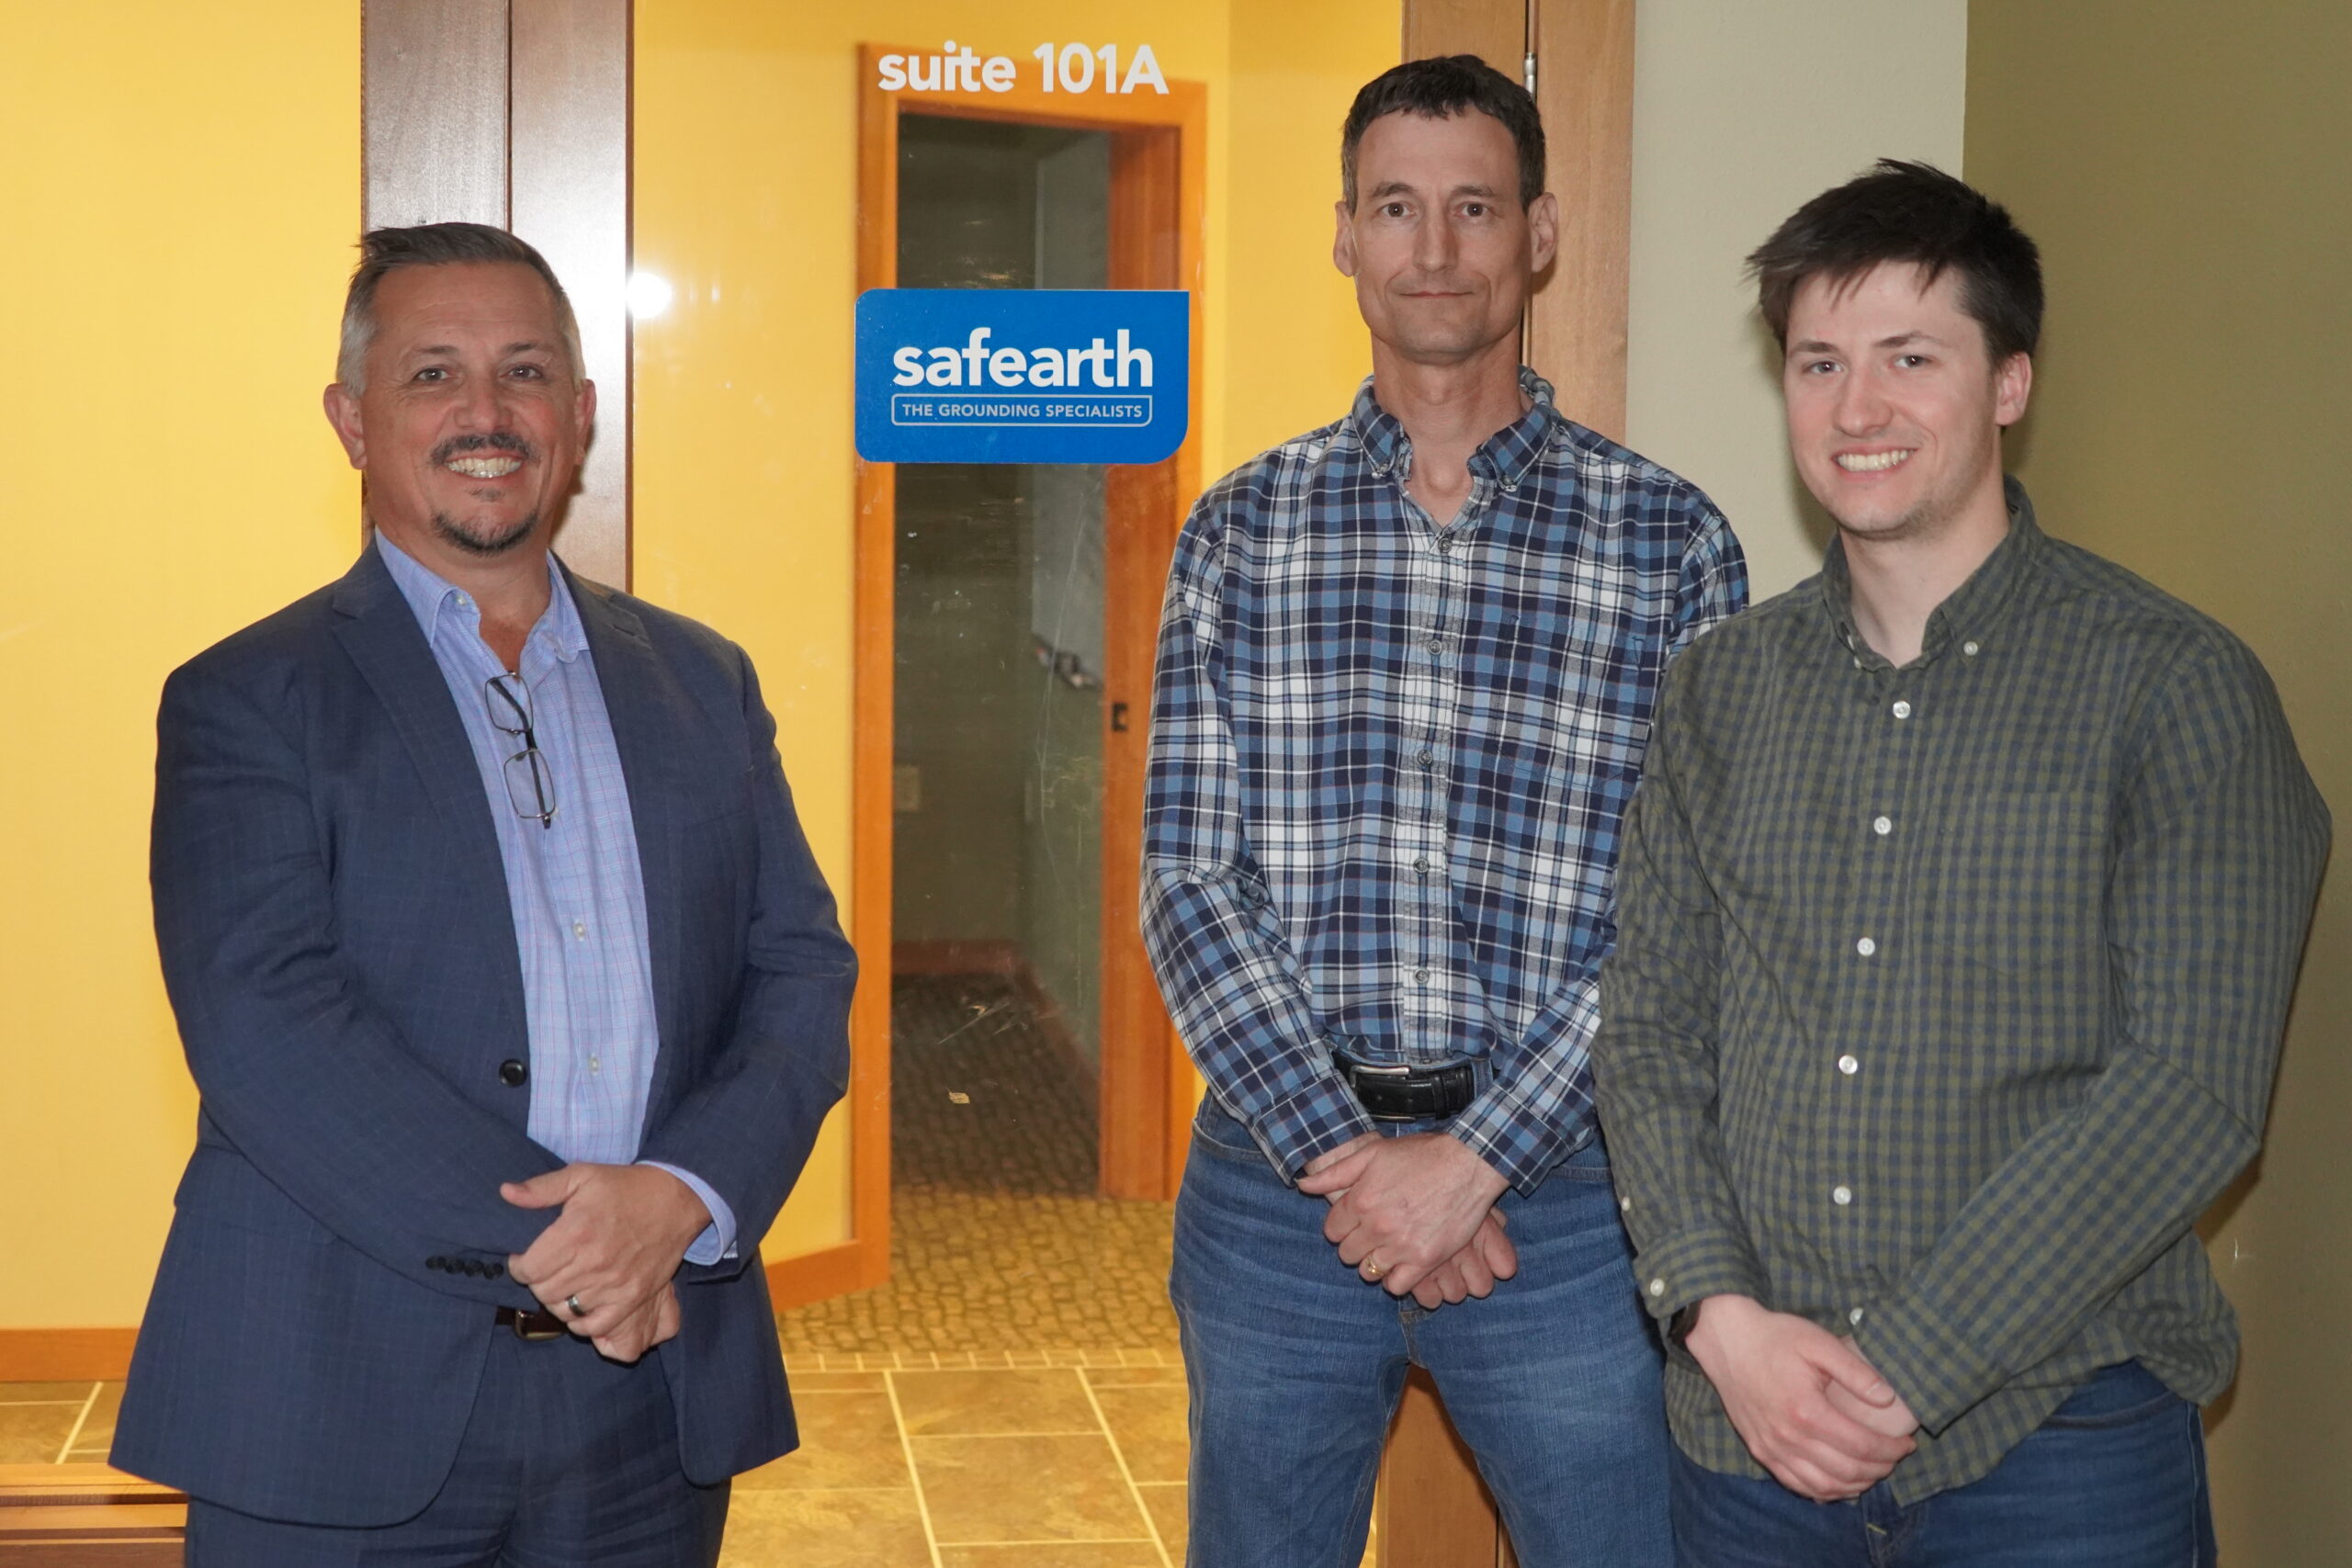 Steve Palmer, Managing Director visiting Bryan and Brandon in Safearth’s Wisconsin office